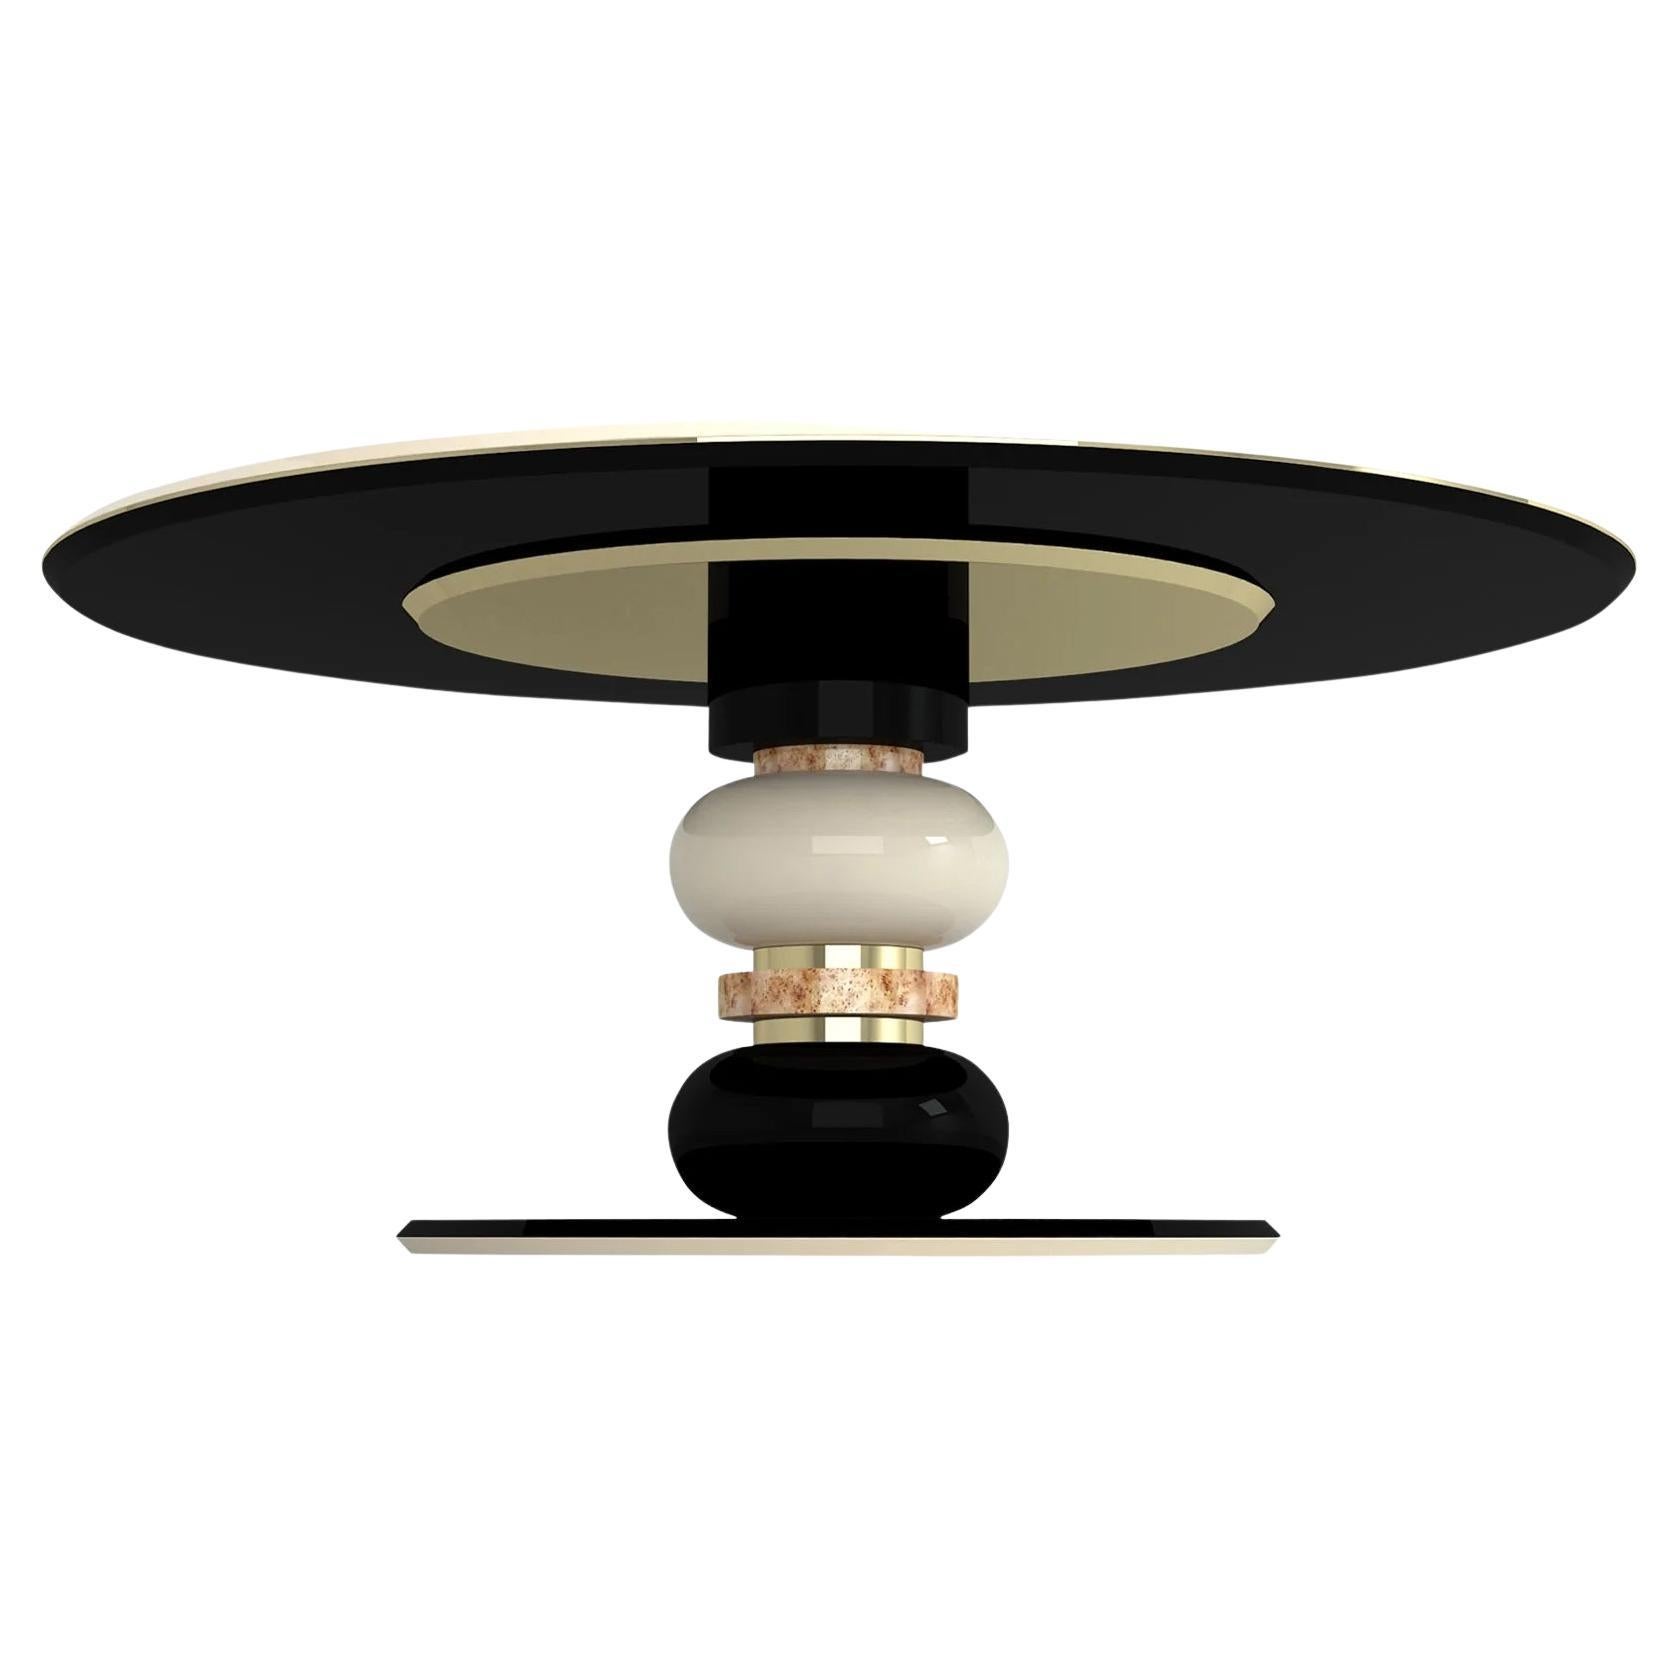 This stylish piece brings to mind the world of beauty and jewelry. Handmade primarily from glossy lacquered wood surfaces in black and cream. The table is then framed at junctures by Poplar Root and polished brass rings.
Measures: H: 78 cm 30.7’’
D: